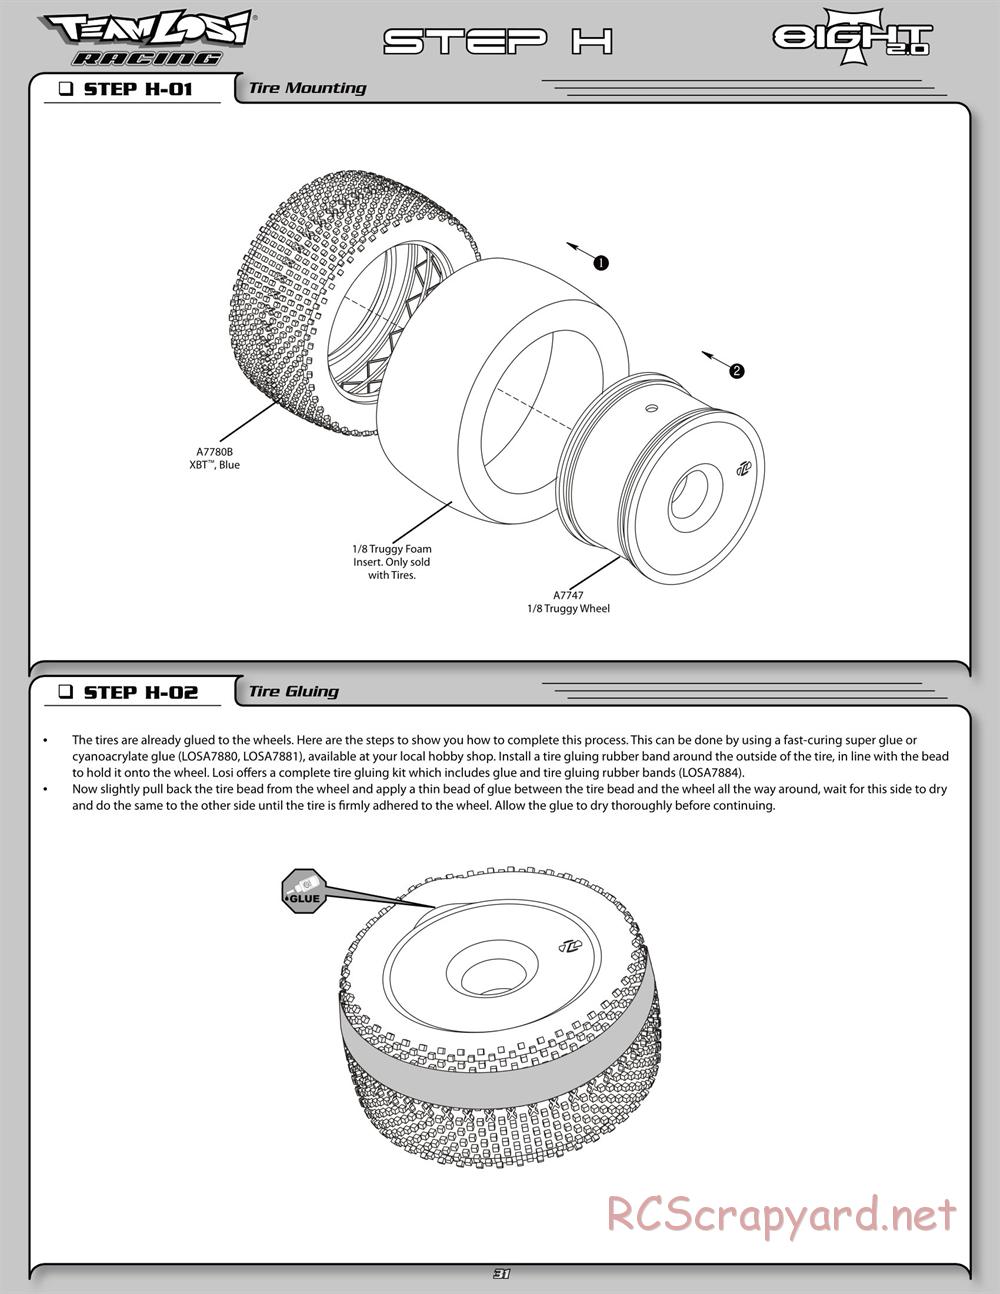 Team Losi - 8ight-T 2.0 Race Roller - Manual - Page 36